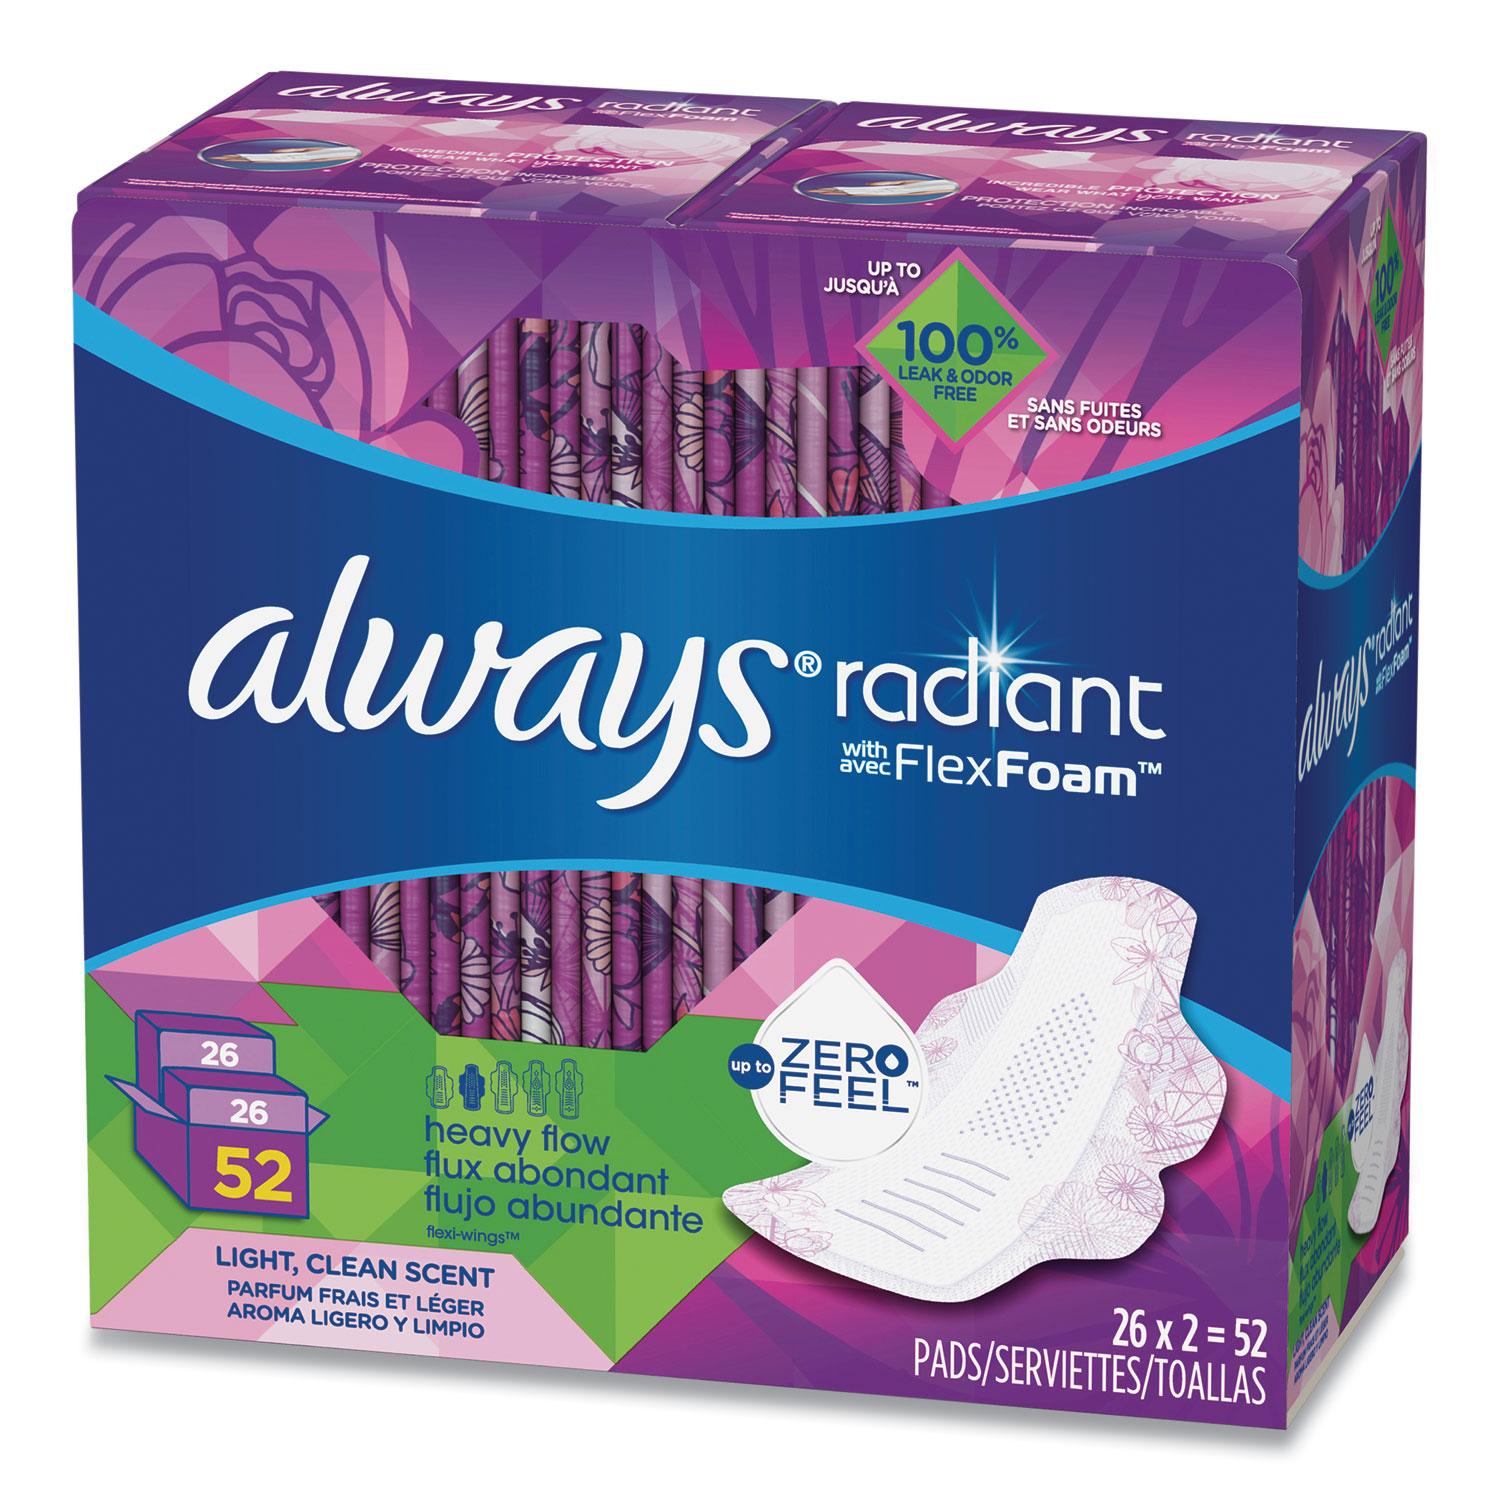  Always 79513 Radiant Pads with Flexfoam, Heavy, 52/Box, Free Delivery in 1-4 Business Days (GRR22001085) 